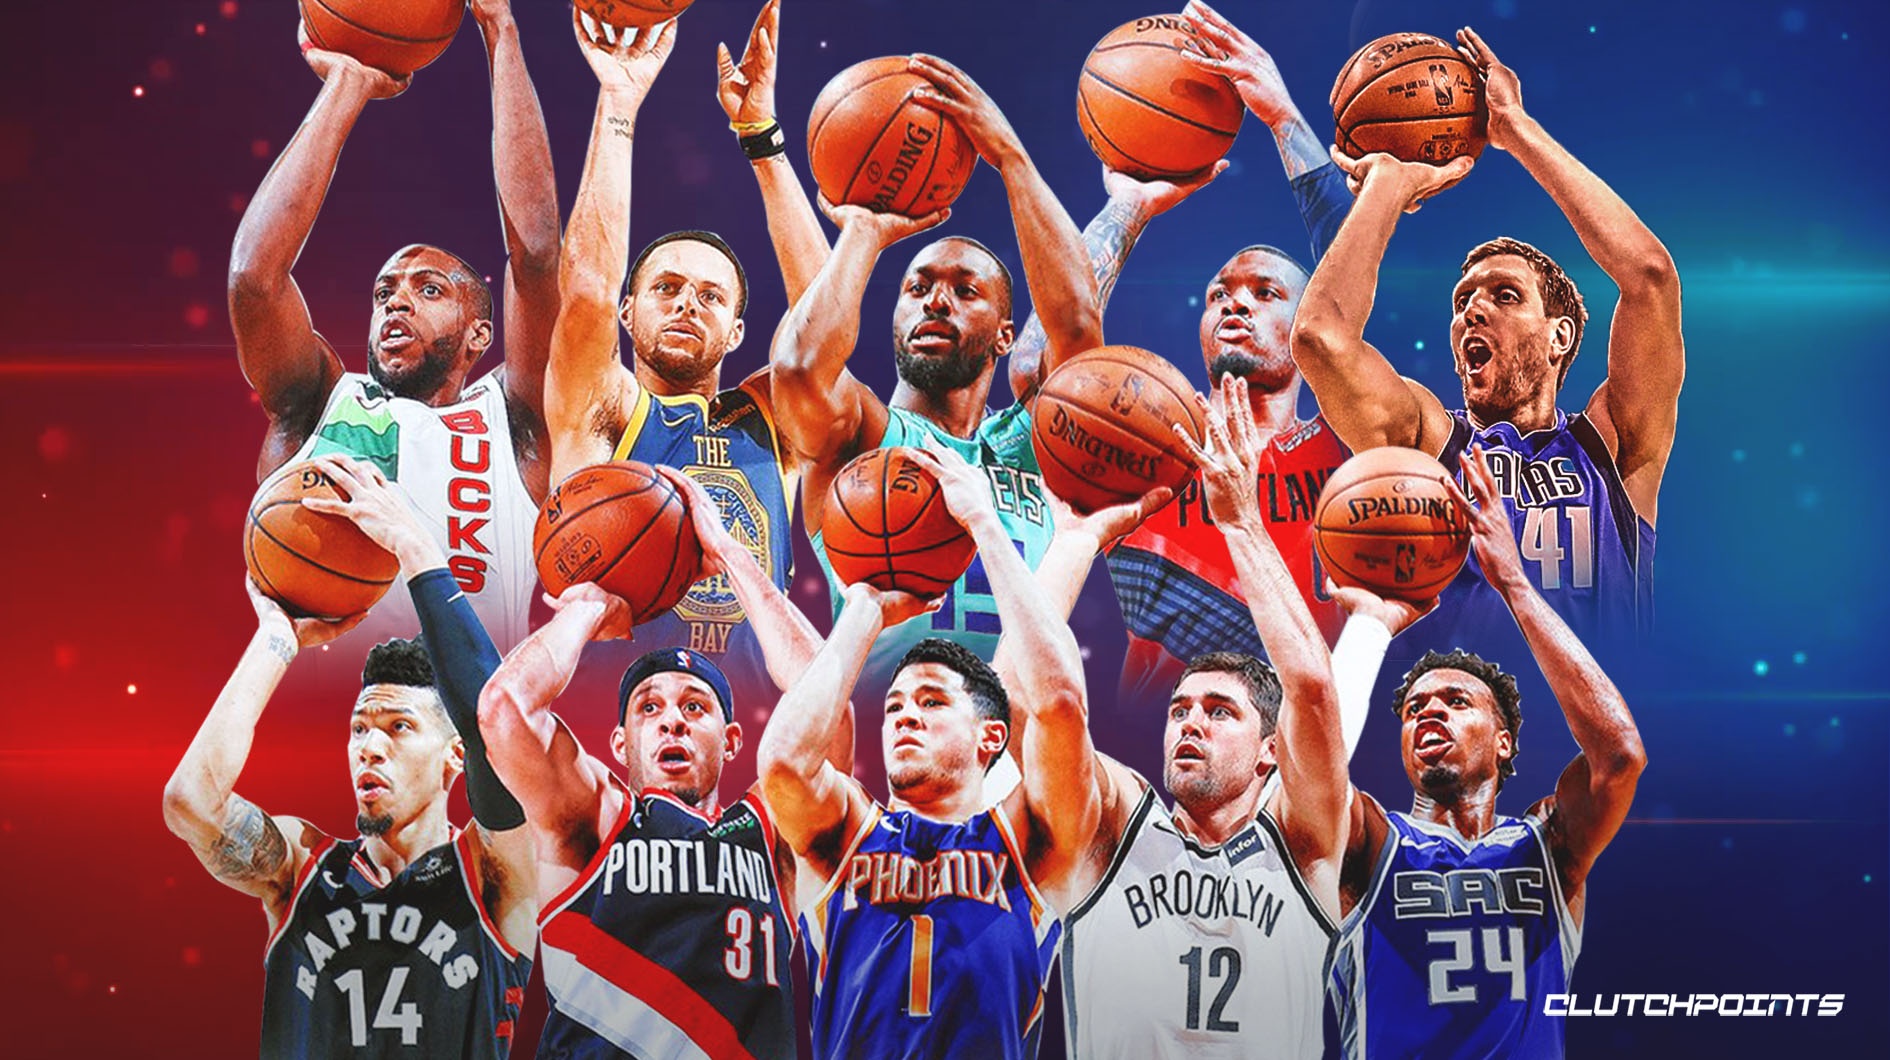 3 Point Contest 2019 Odds